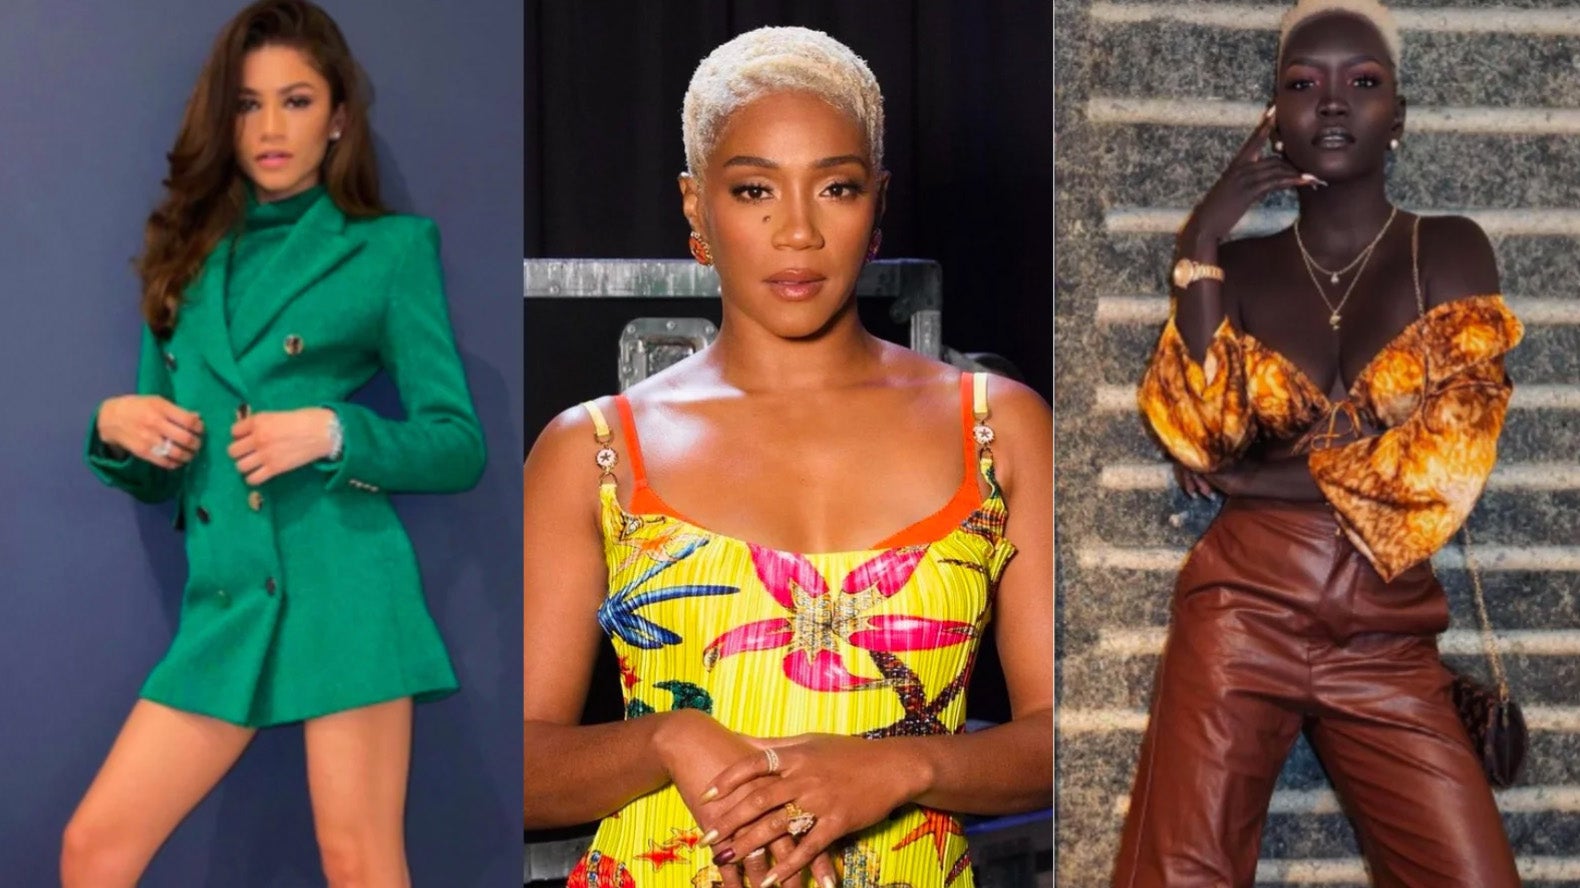 Tiffany Haddish, Zendaya & More Keep It Cute & Colorful In This Week's Edition Of Star Gazing!